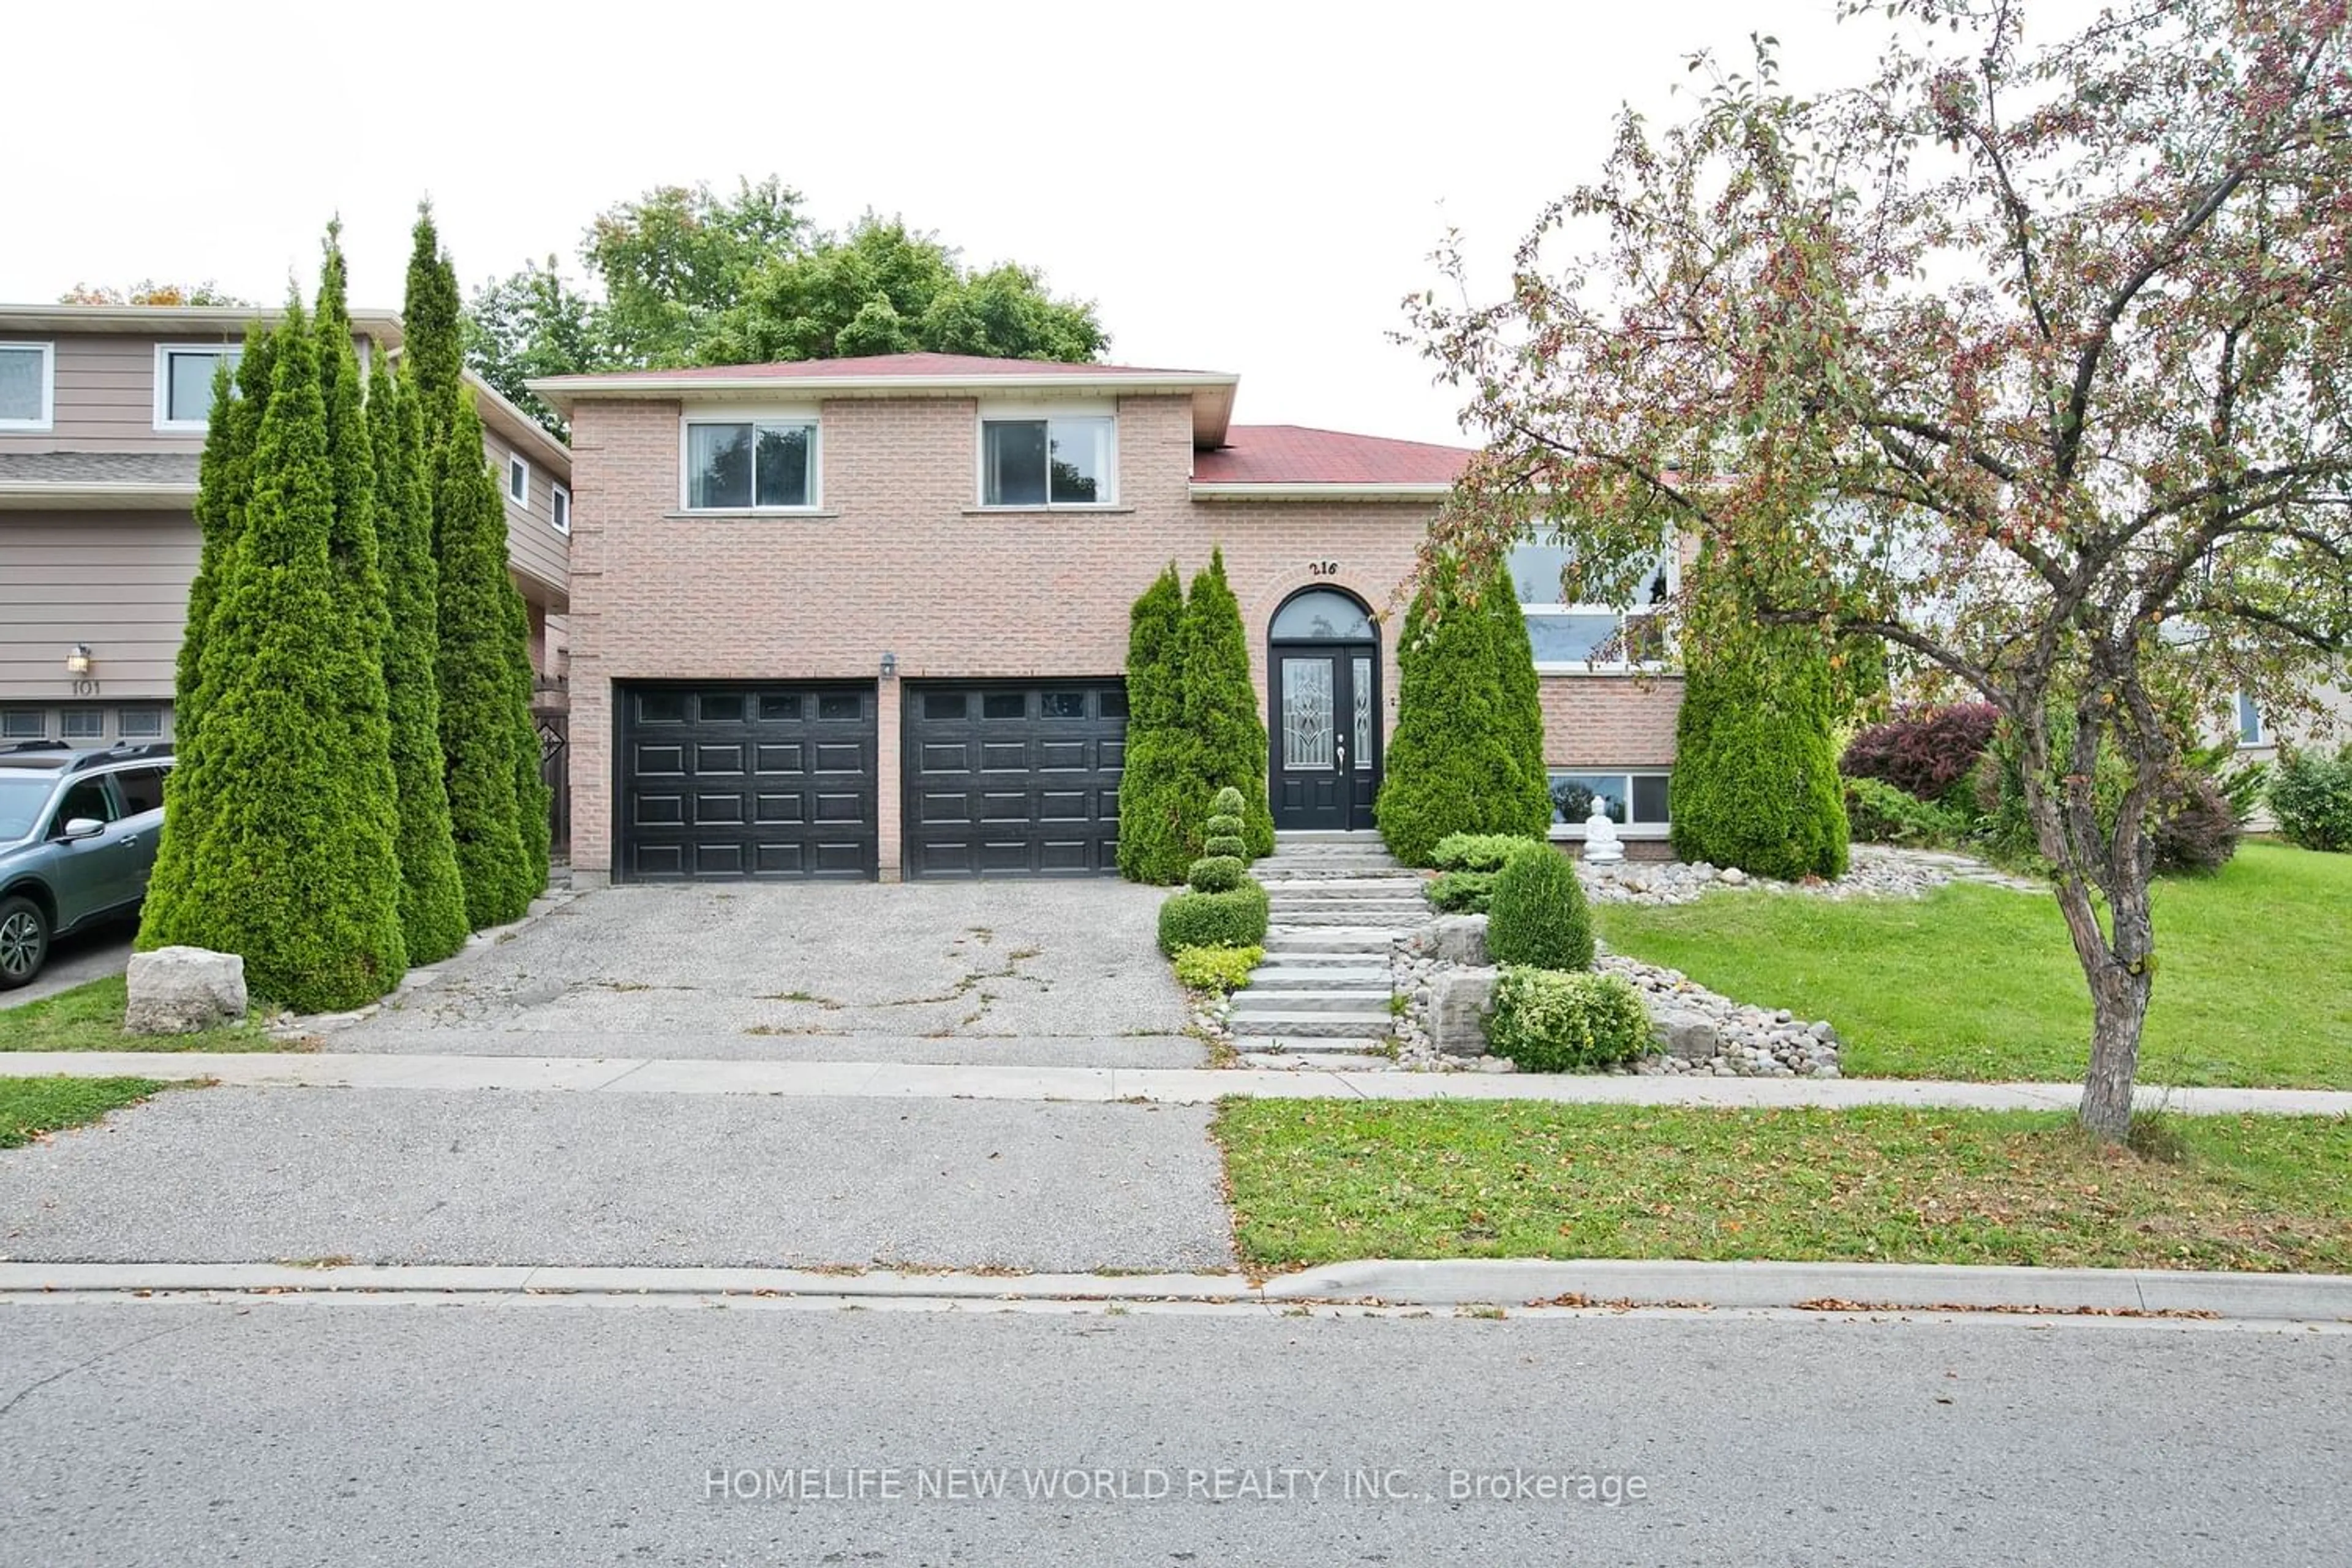 Frontside or backside of a home for 216 Colborne St, Bradford West Gwillimbury Ontario L3Z 2R5